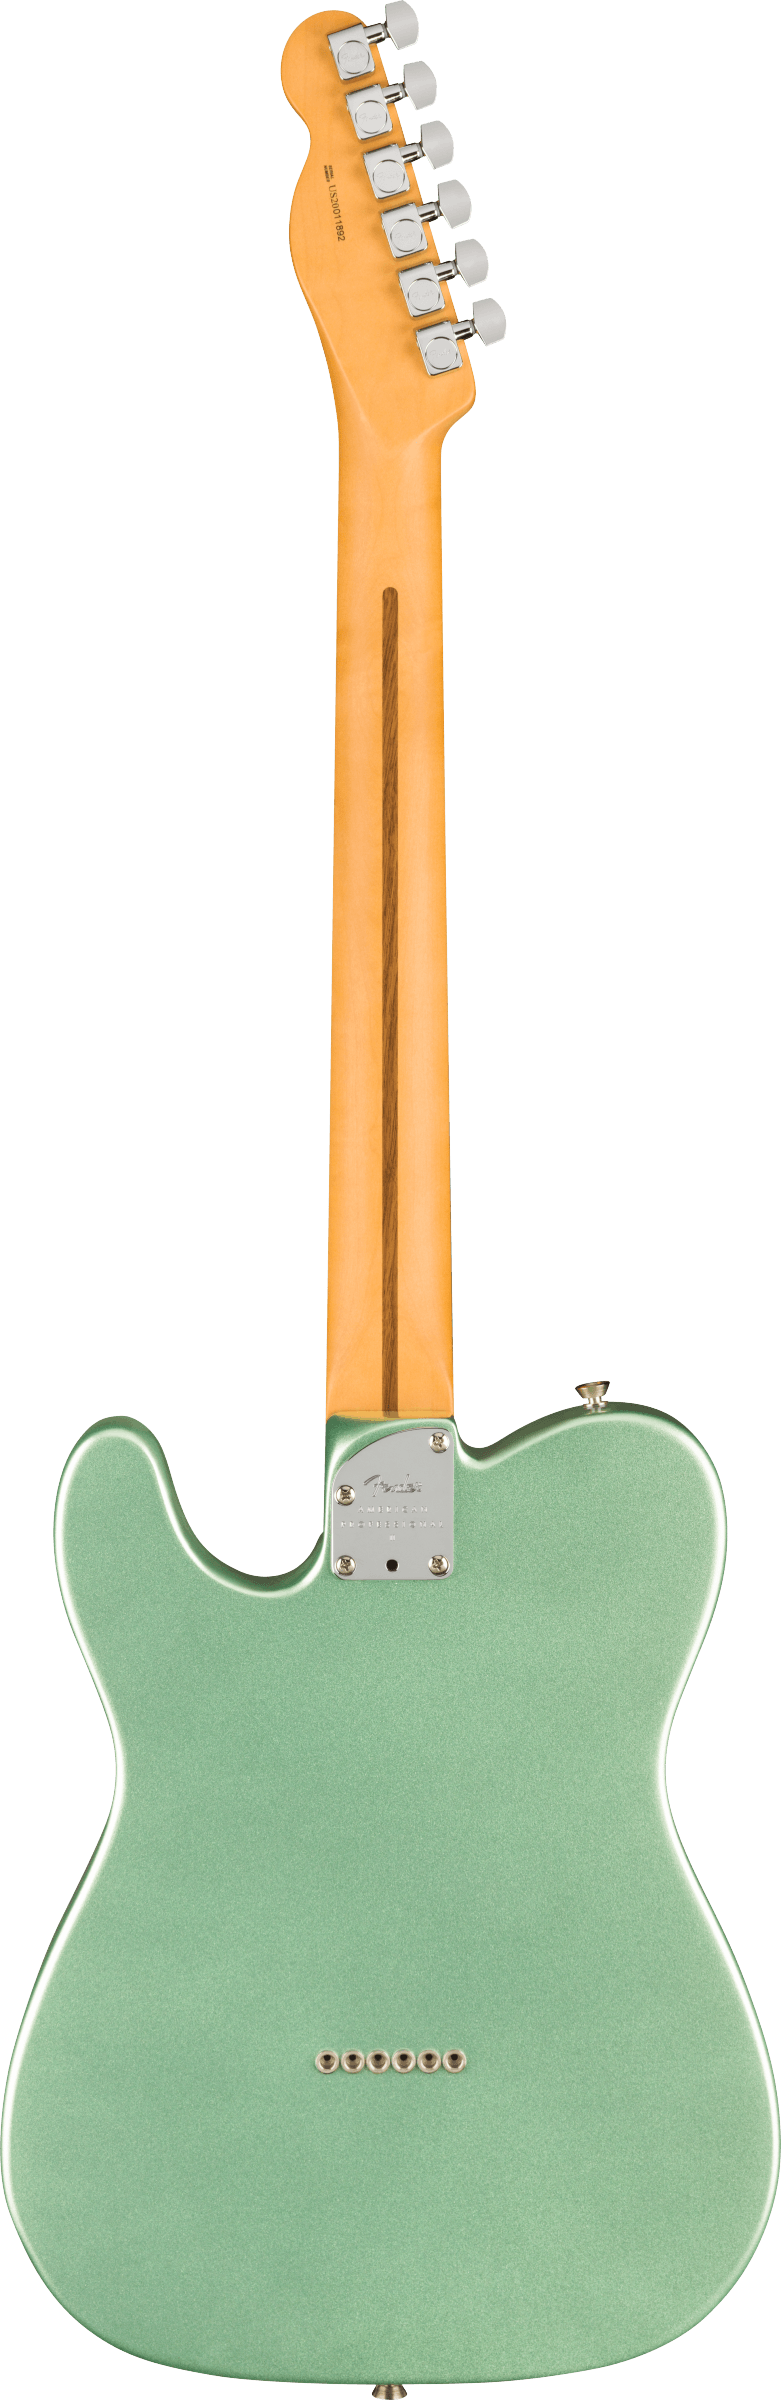 Back of Fender Telecaster electric guitar in Mystic Surf Green Tone Shop Guitars DFW